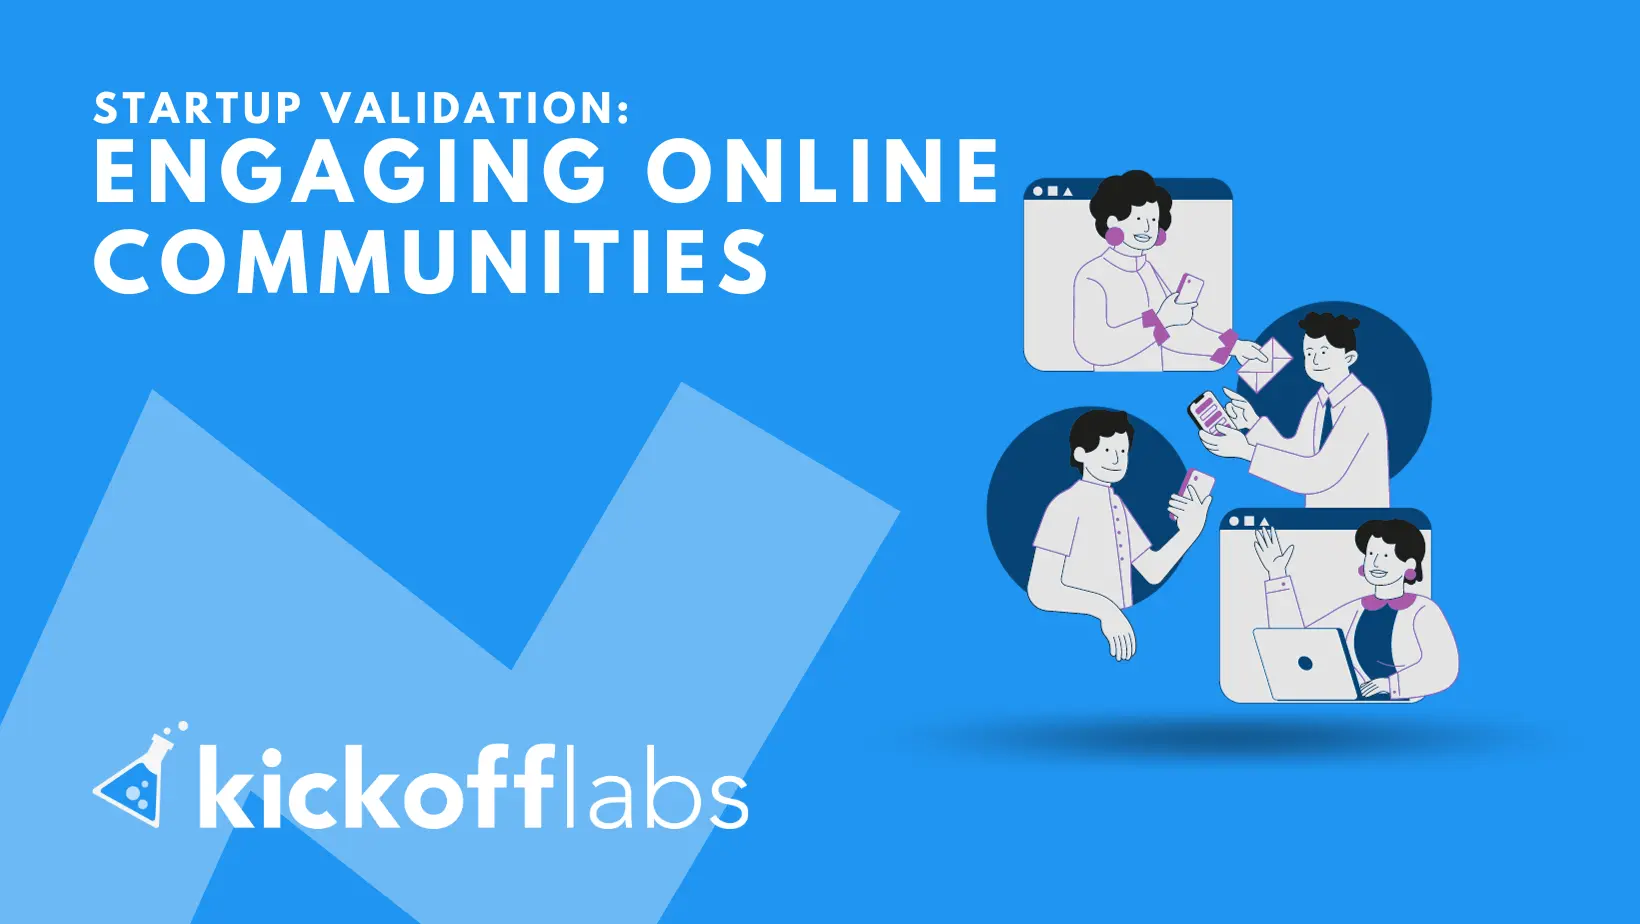 How to Validate Startup Ideas With Online Communities?